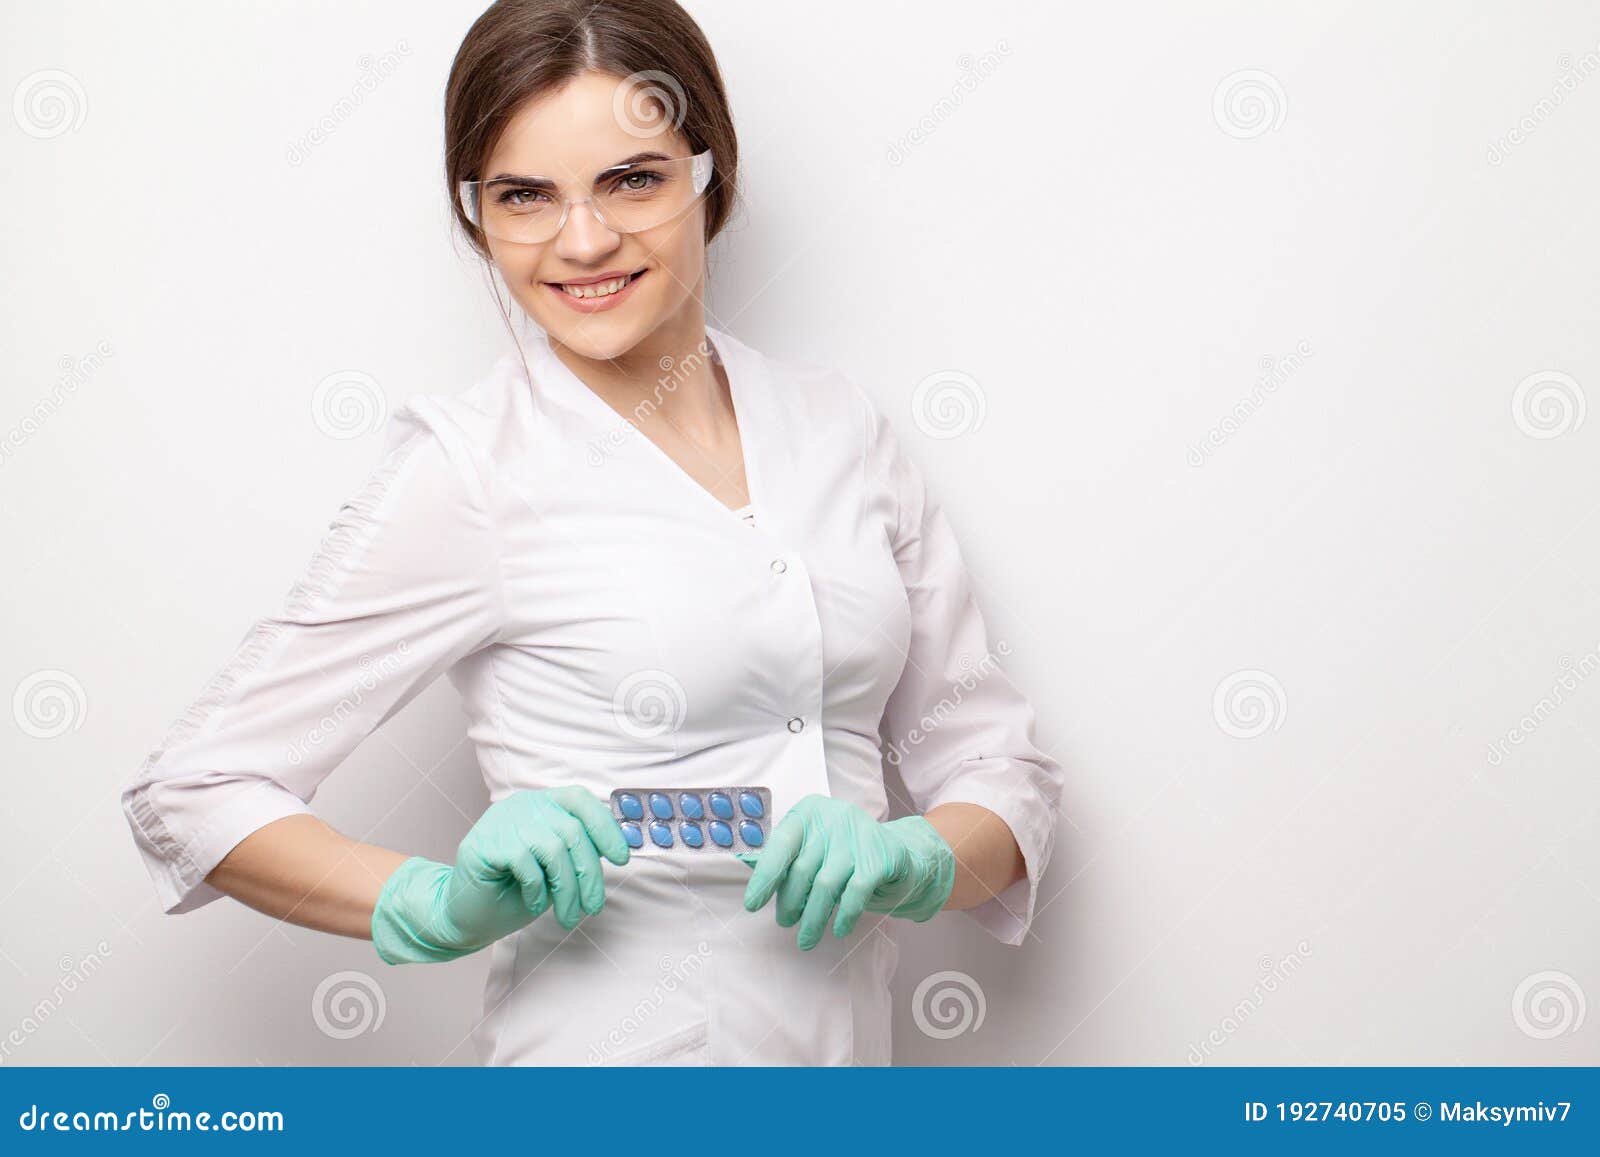 Sexual Health, a Doctor in a White Coat Holding a Pill for a Healthy Sex Life of Men Stock Image pic